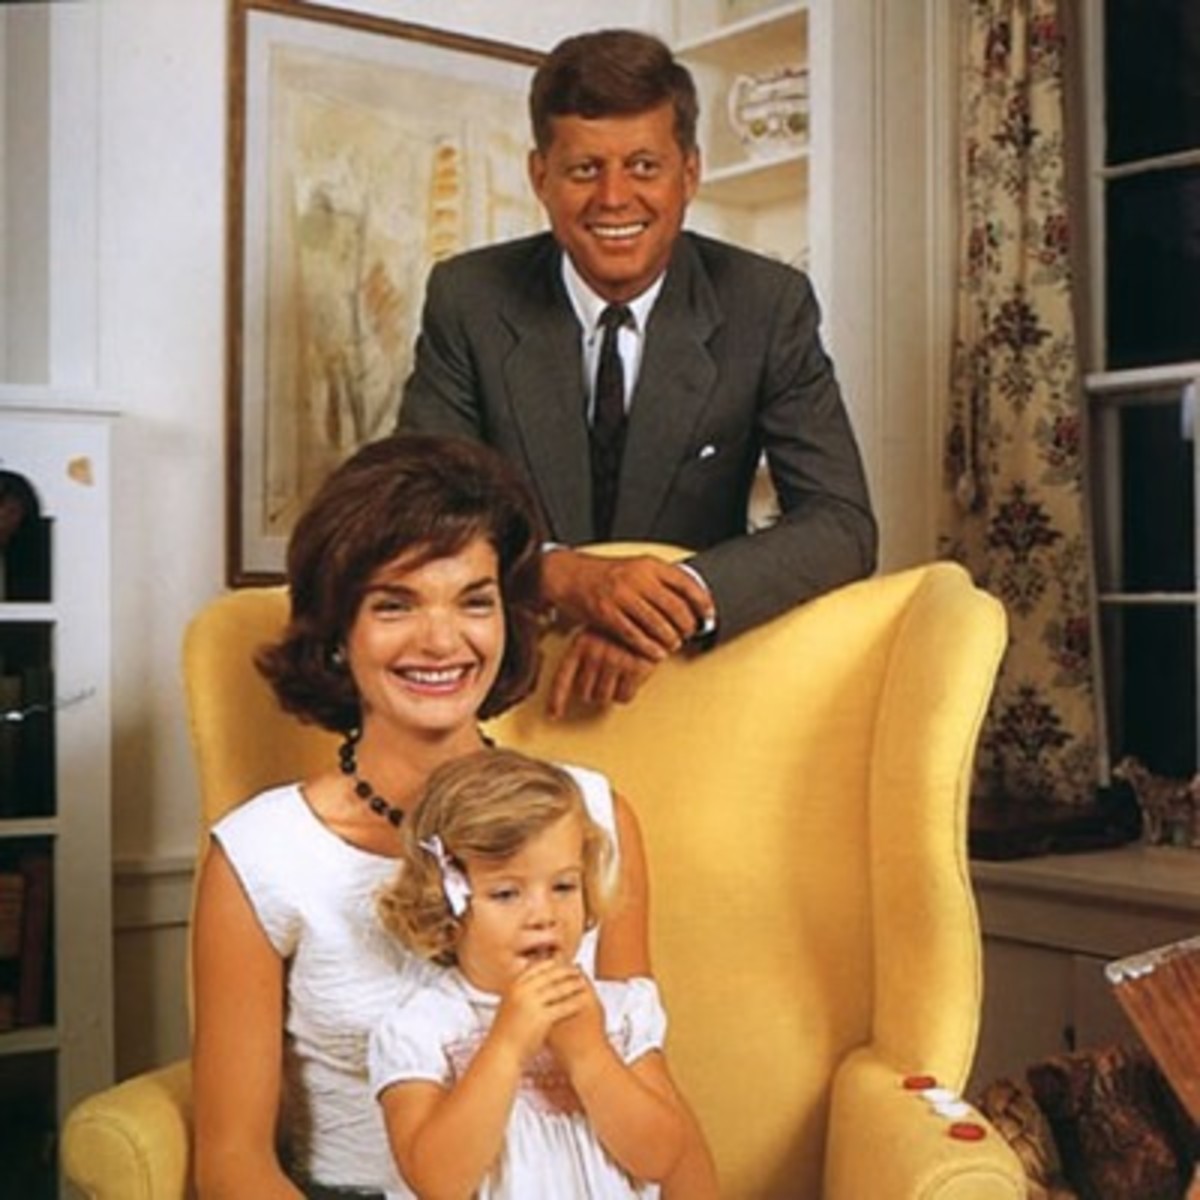 President, Jackie and Caroline at the White House